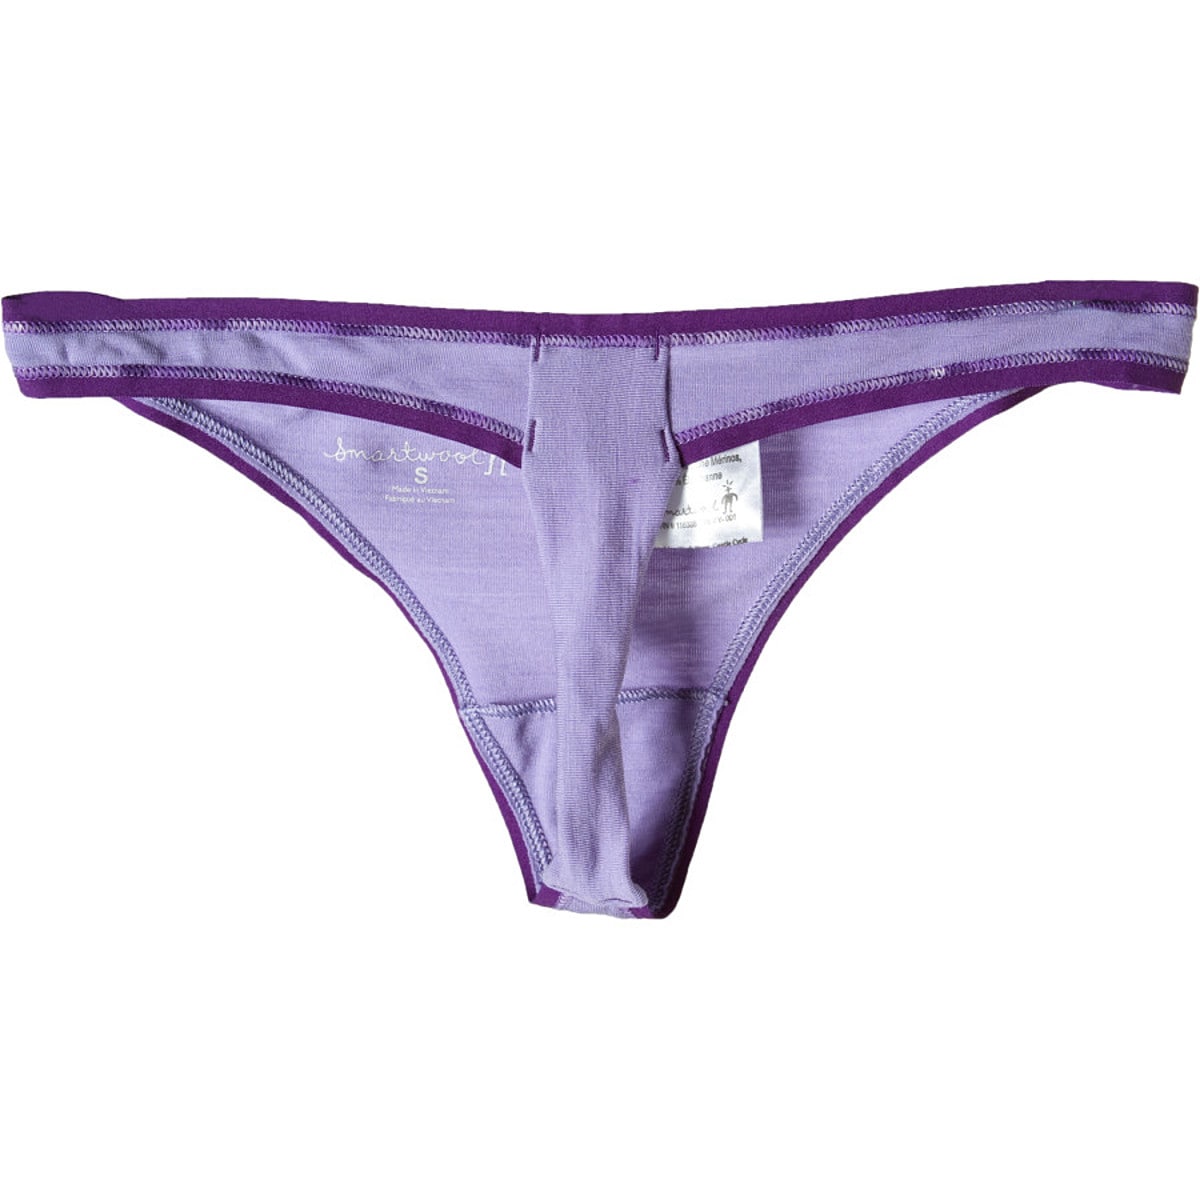 Smartwool Microweight Thong - Women's | Backcountry.com